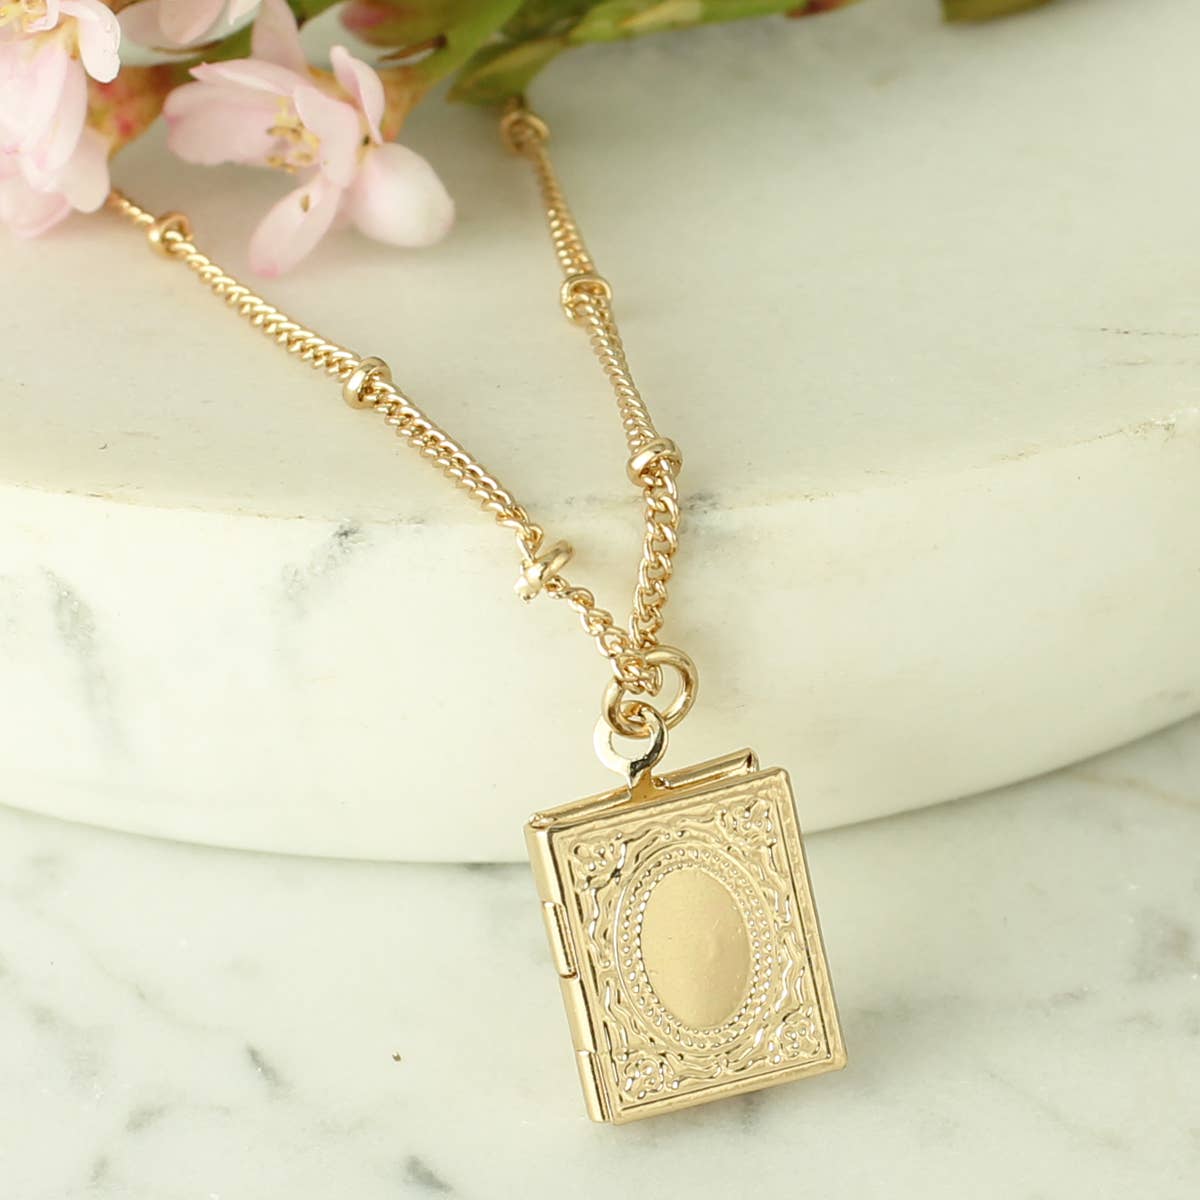 Secret Diary Gold Book Locket Necklace